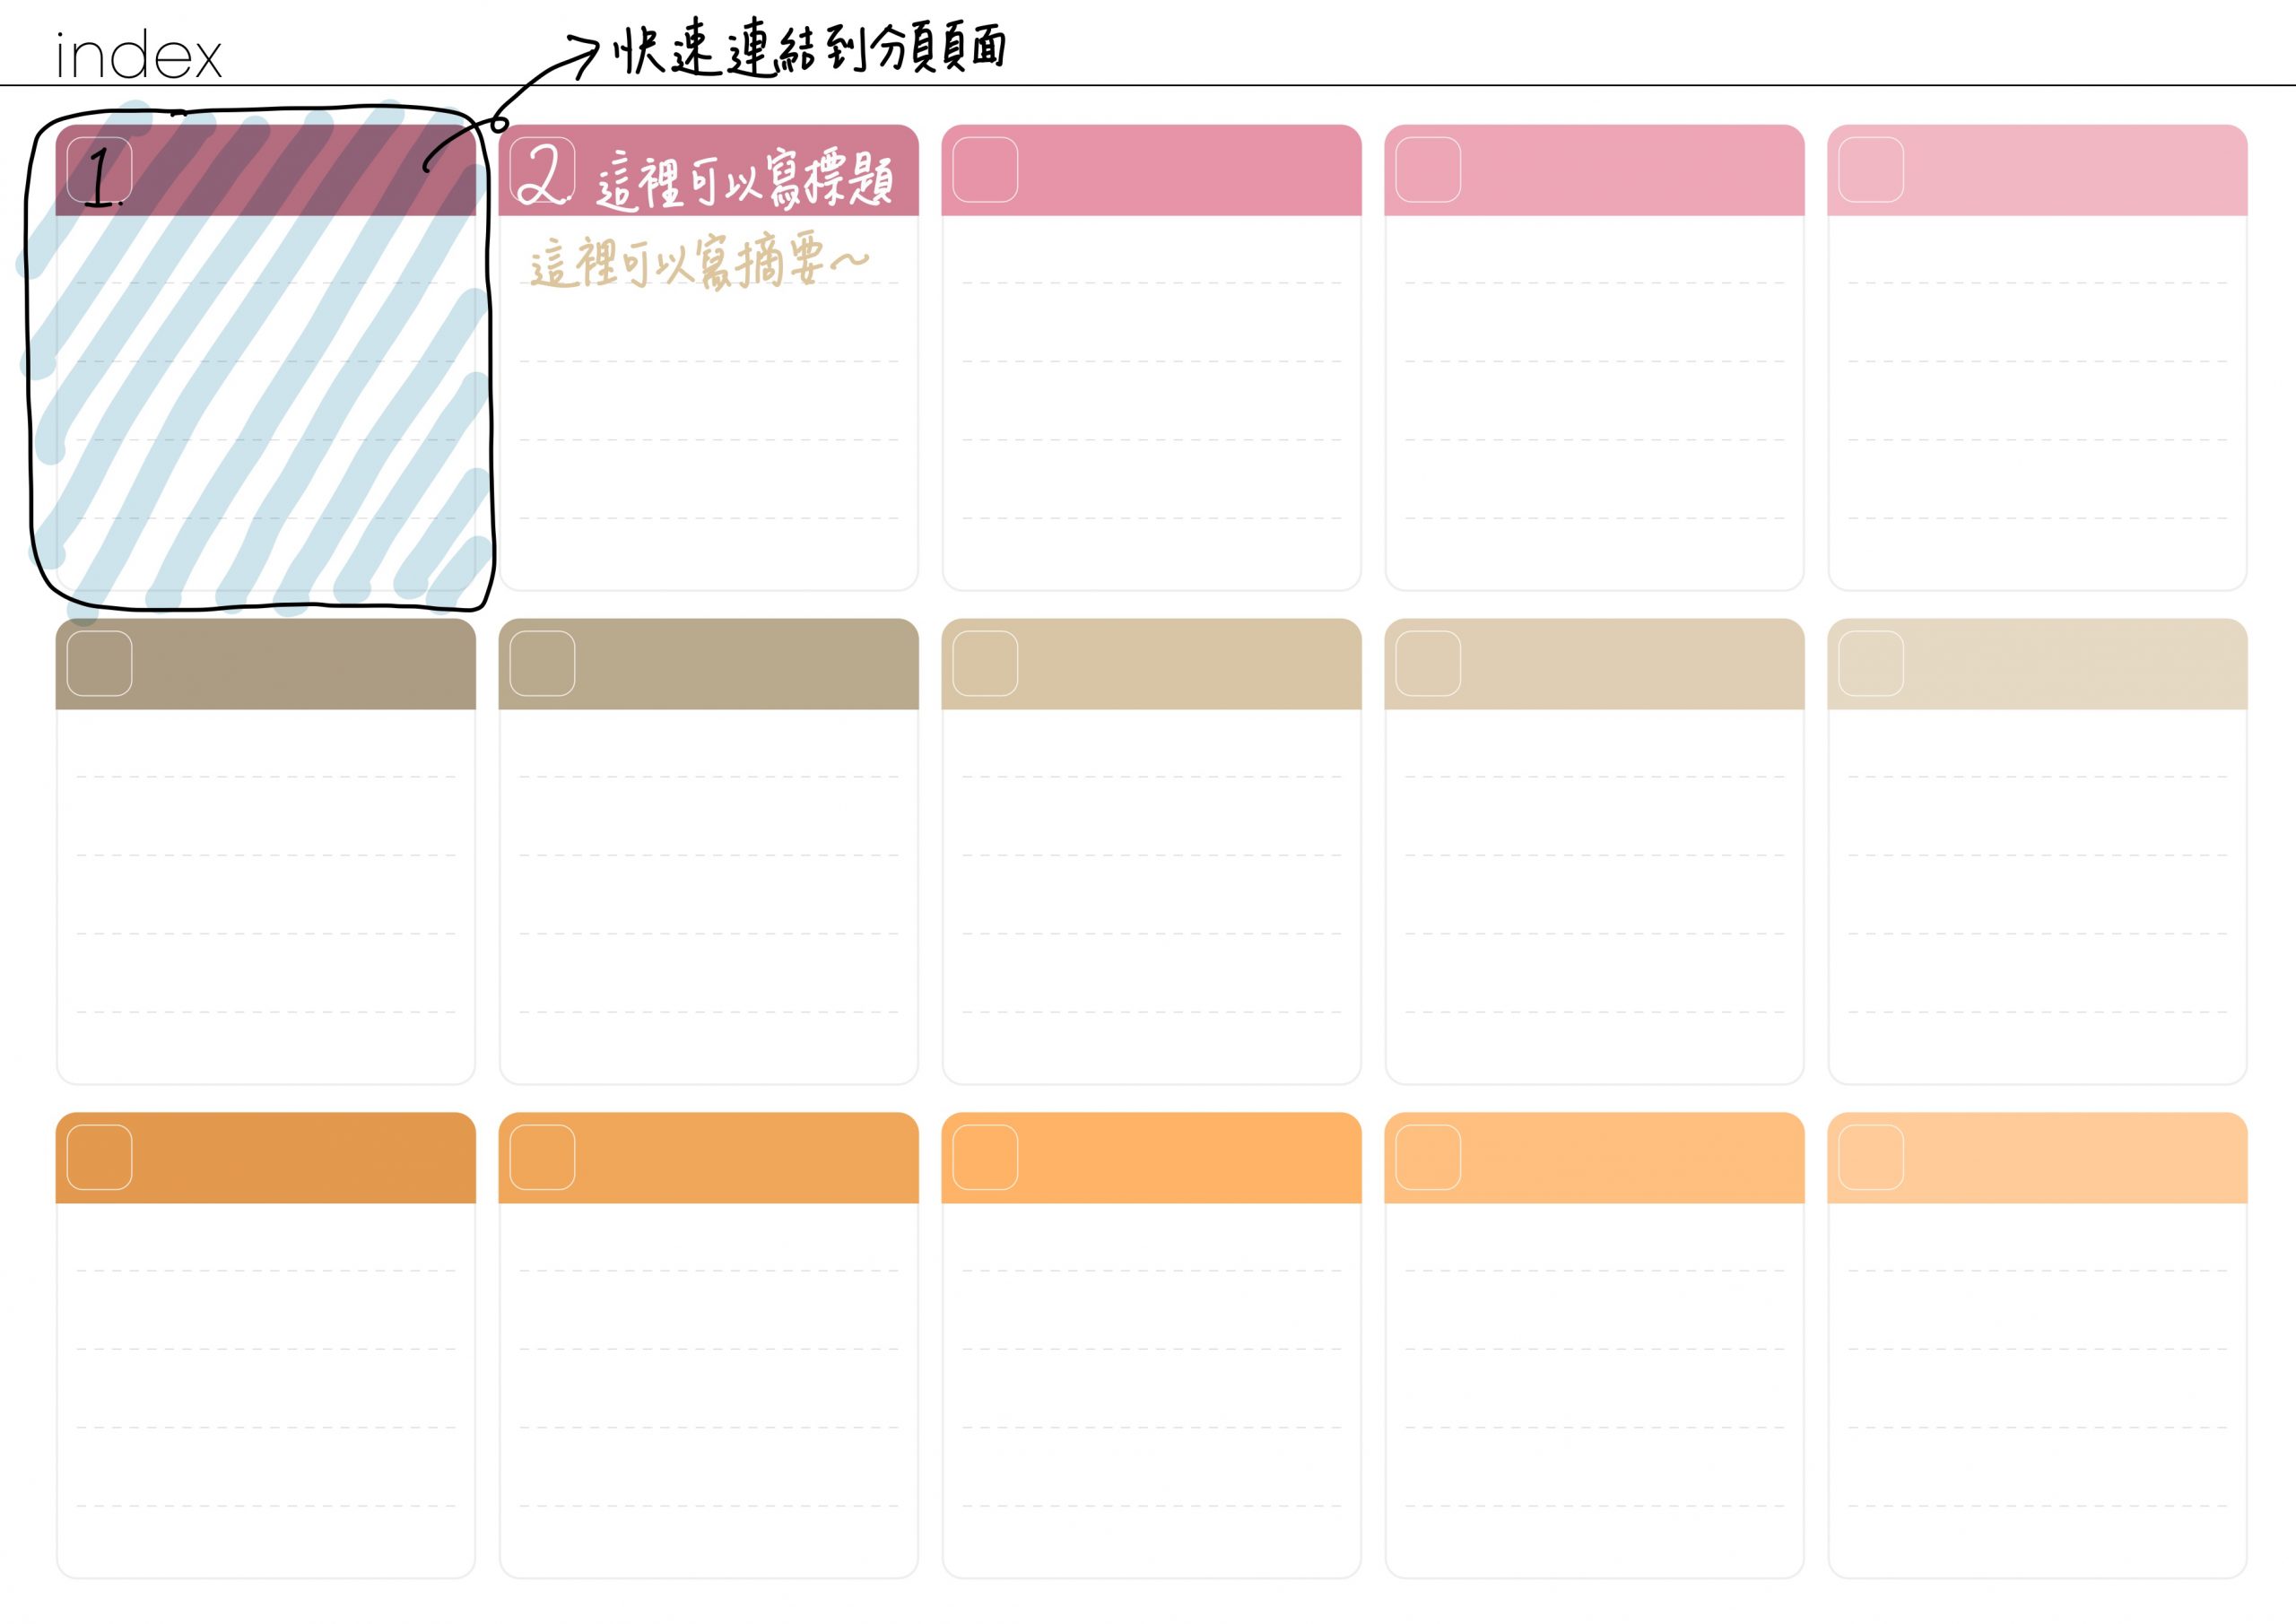 Notebook-Landscape-Solid Color Cover-15 Tabs-Strawberry Cake And Weekends-White Mode 索引手寫說明 | me.Learning